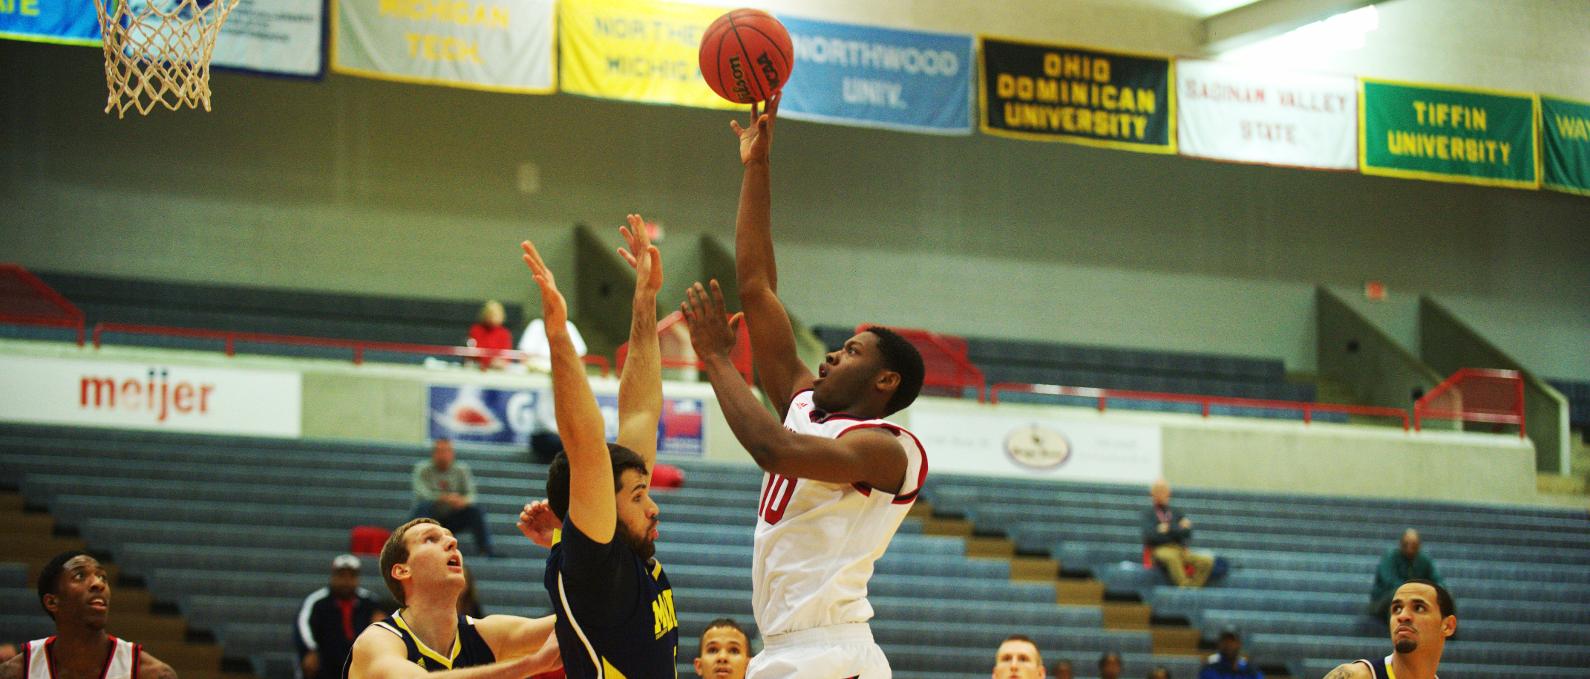 Cardinals Fall On Last Second Tip-in Against Walsh